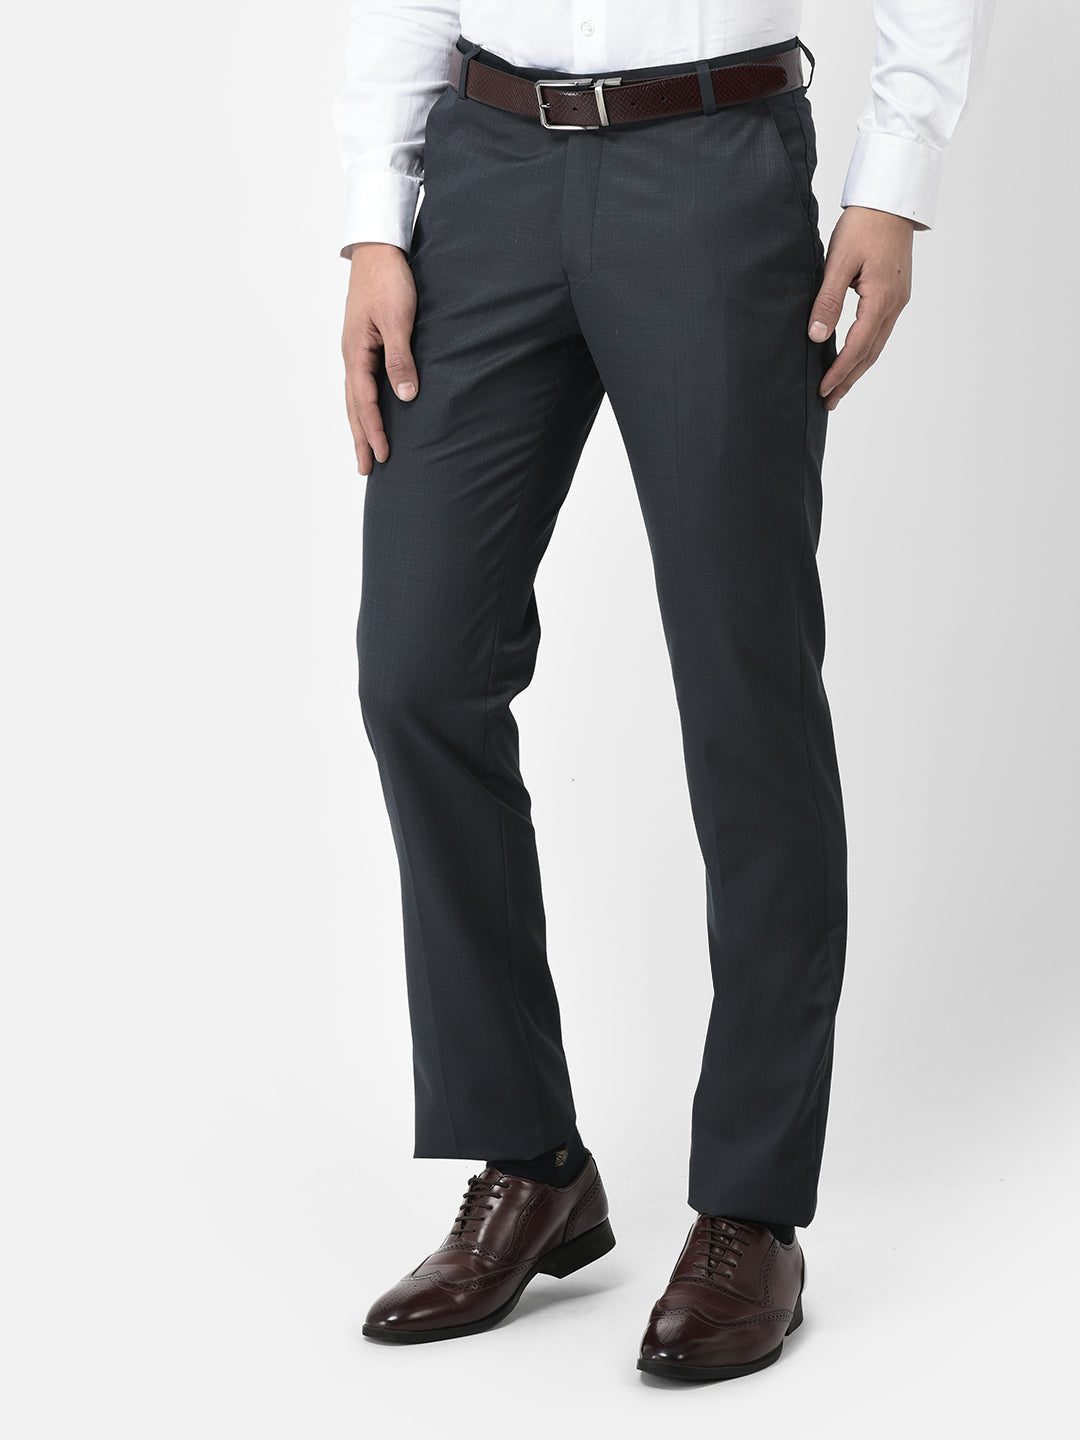 Formal 4 way Stretch Trousers in Black Slim Fit  SUBTRACT